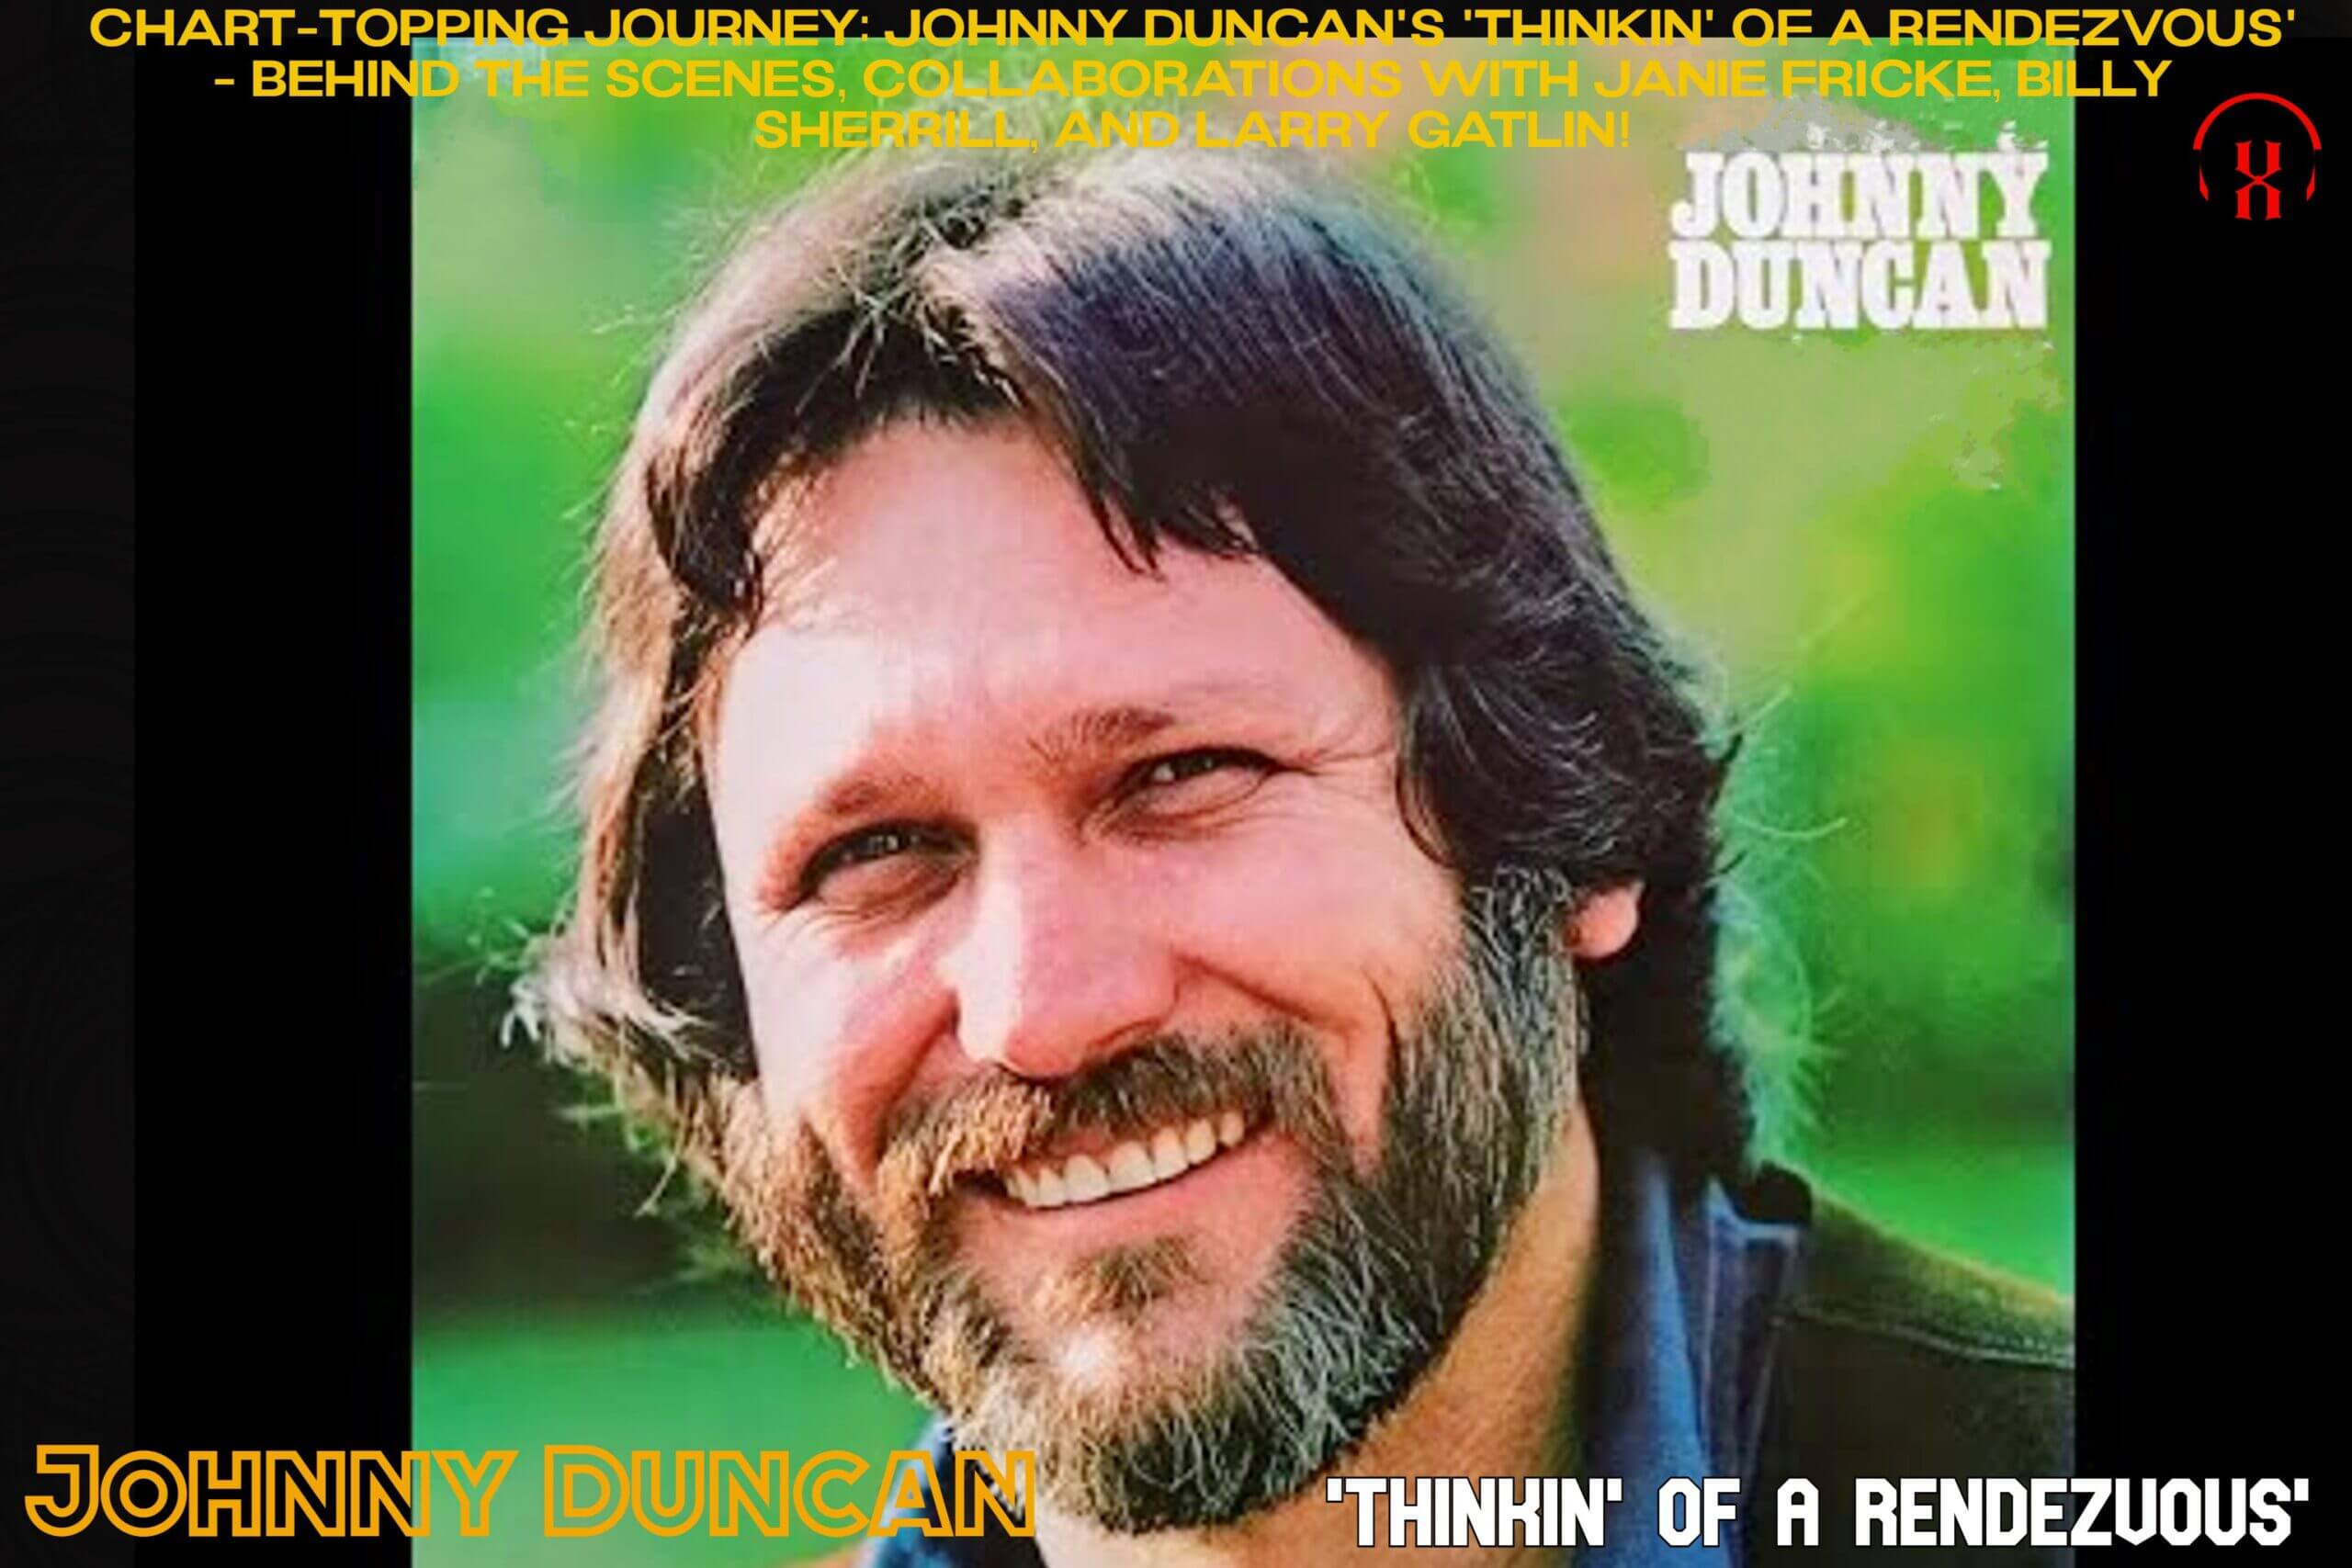 “Chart-Topping Journey: Johnny Duncan’s ‘Thinkin’ Of A Rendezvous’ – Behind the Scenes, Collaborations with Janie Fricke, Billy Sherrill, and Larry Gatlin!”